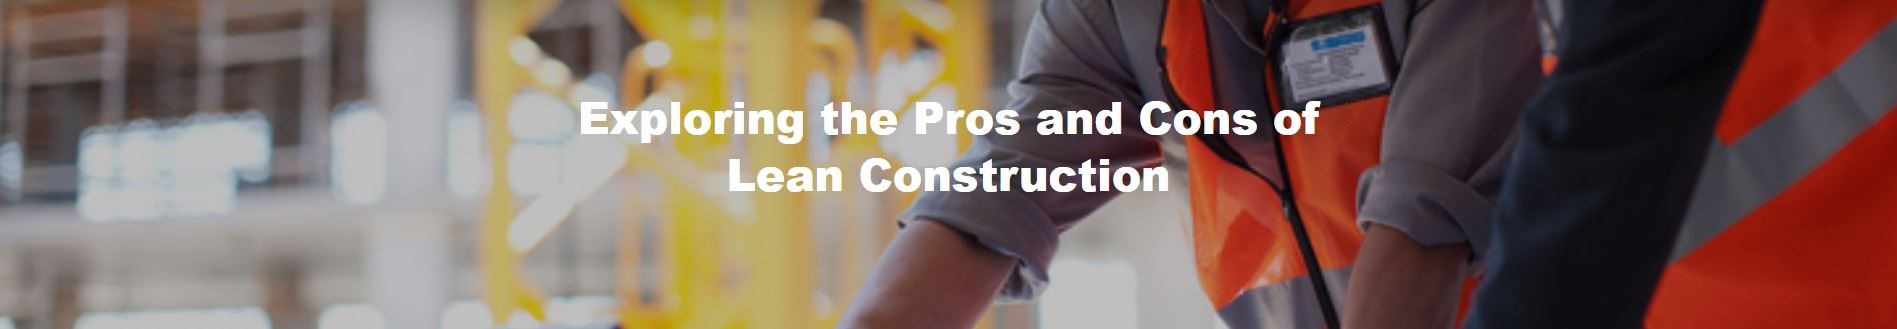 Exploring the Pros and Cons of Lean Construction | Milwaukee Tools Europe